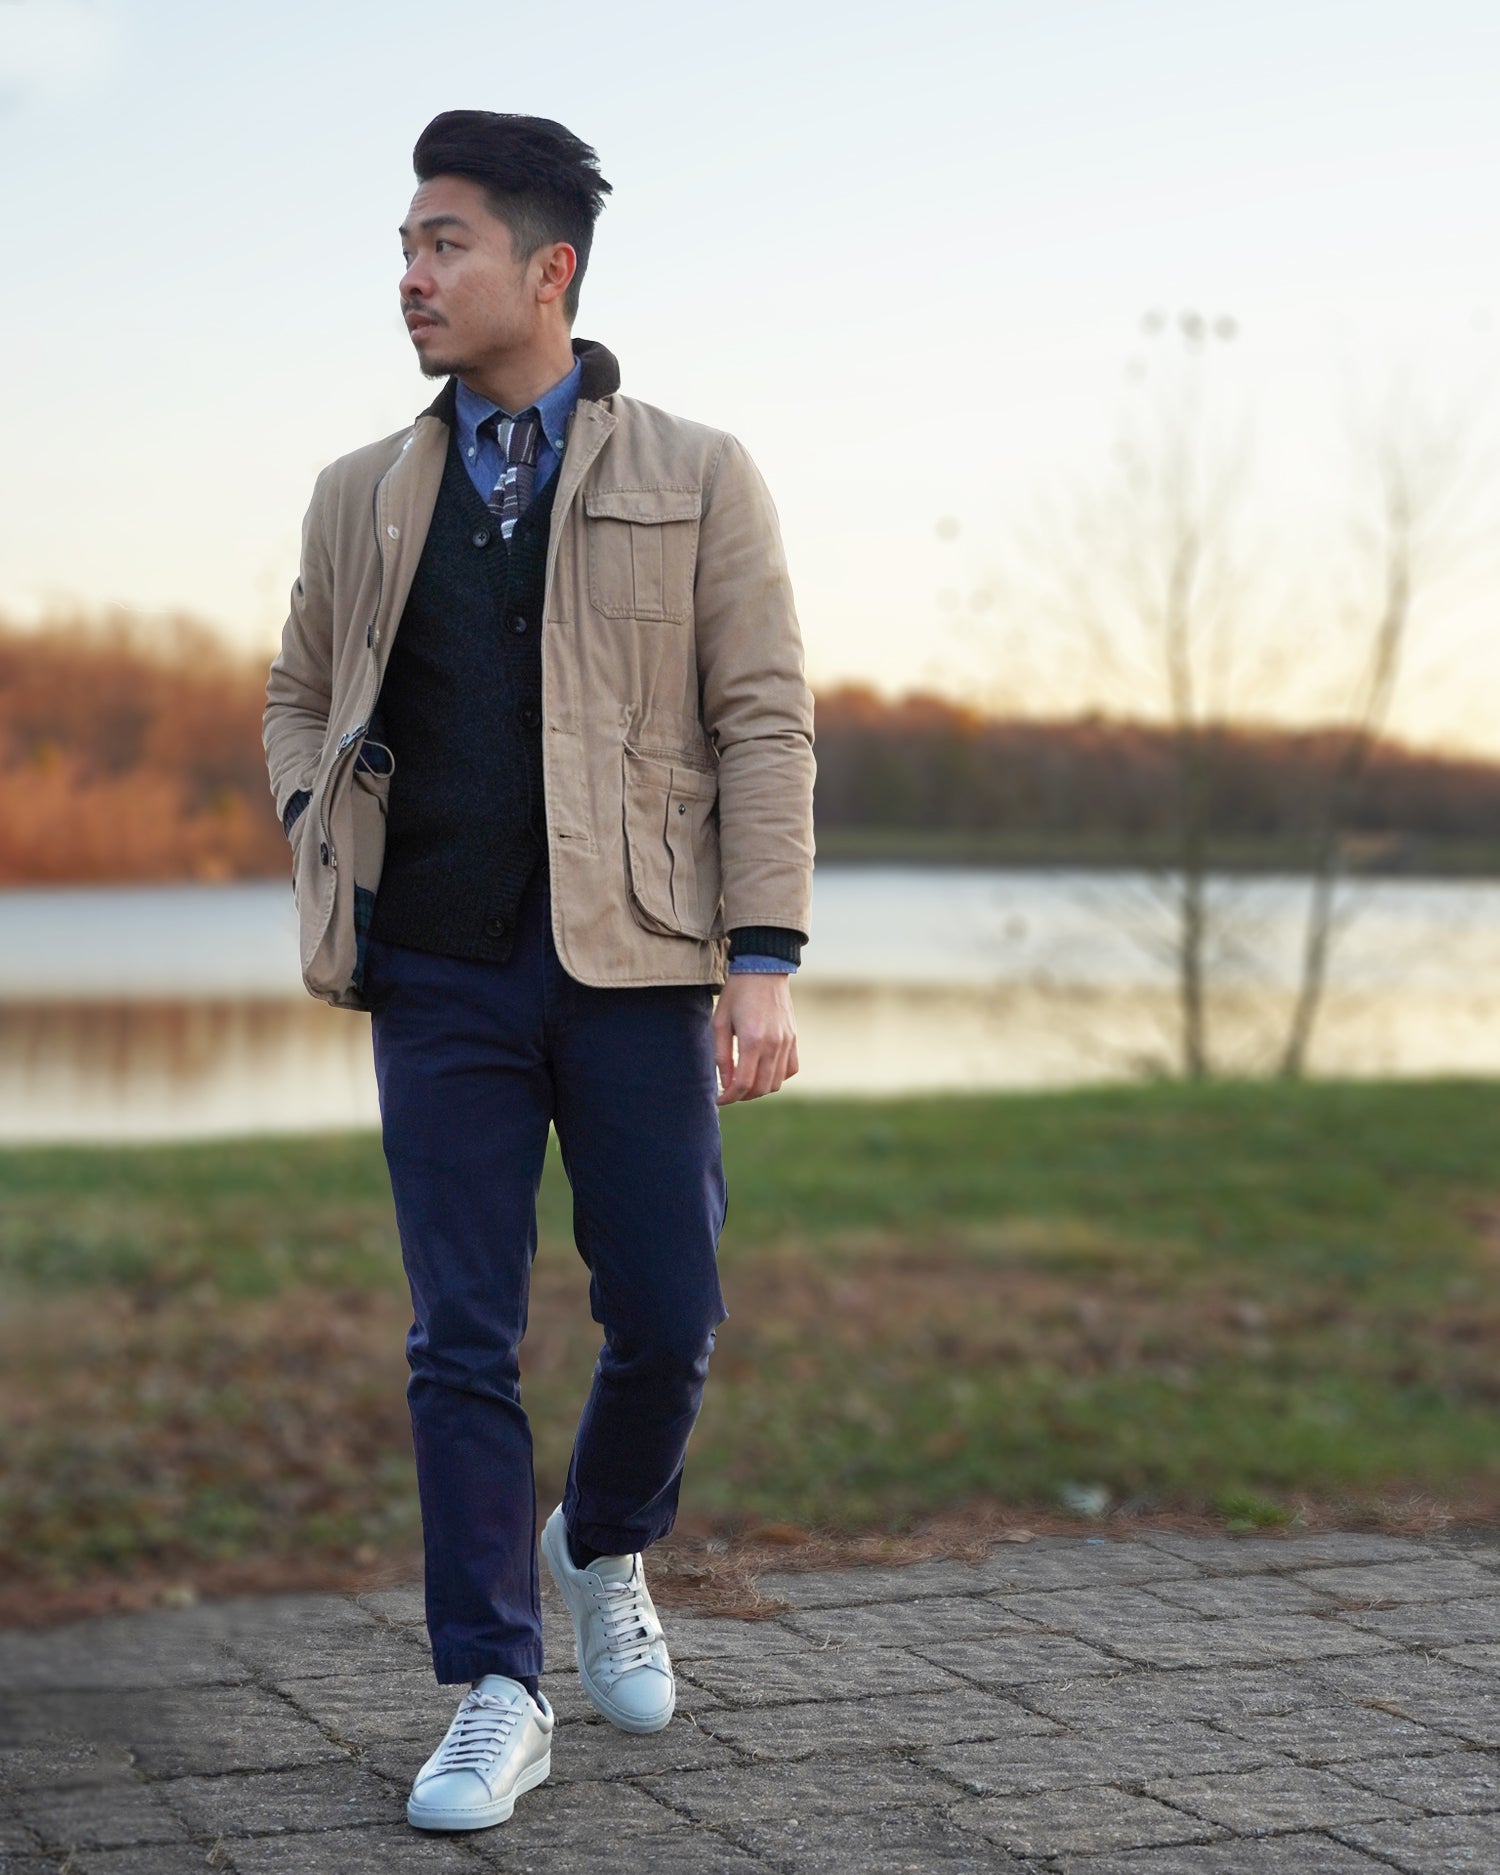 the melbourne knit tie paired with a field jacket